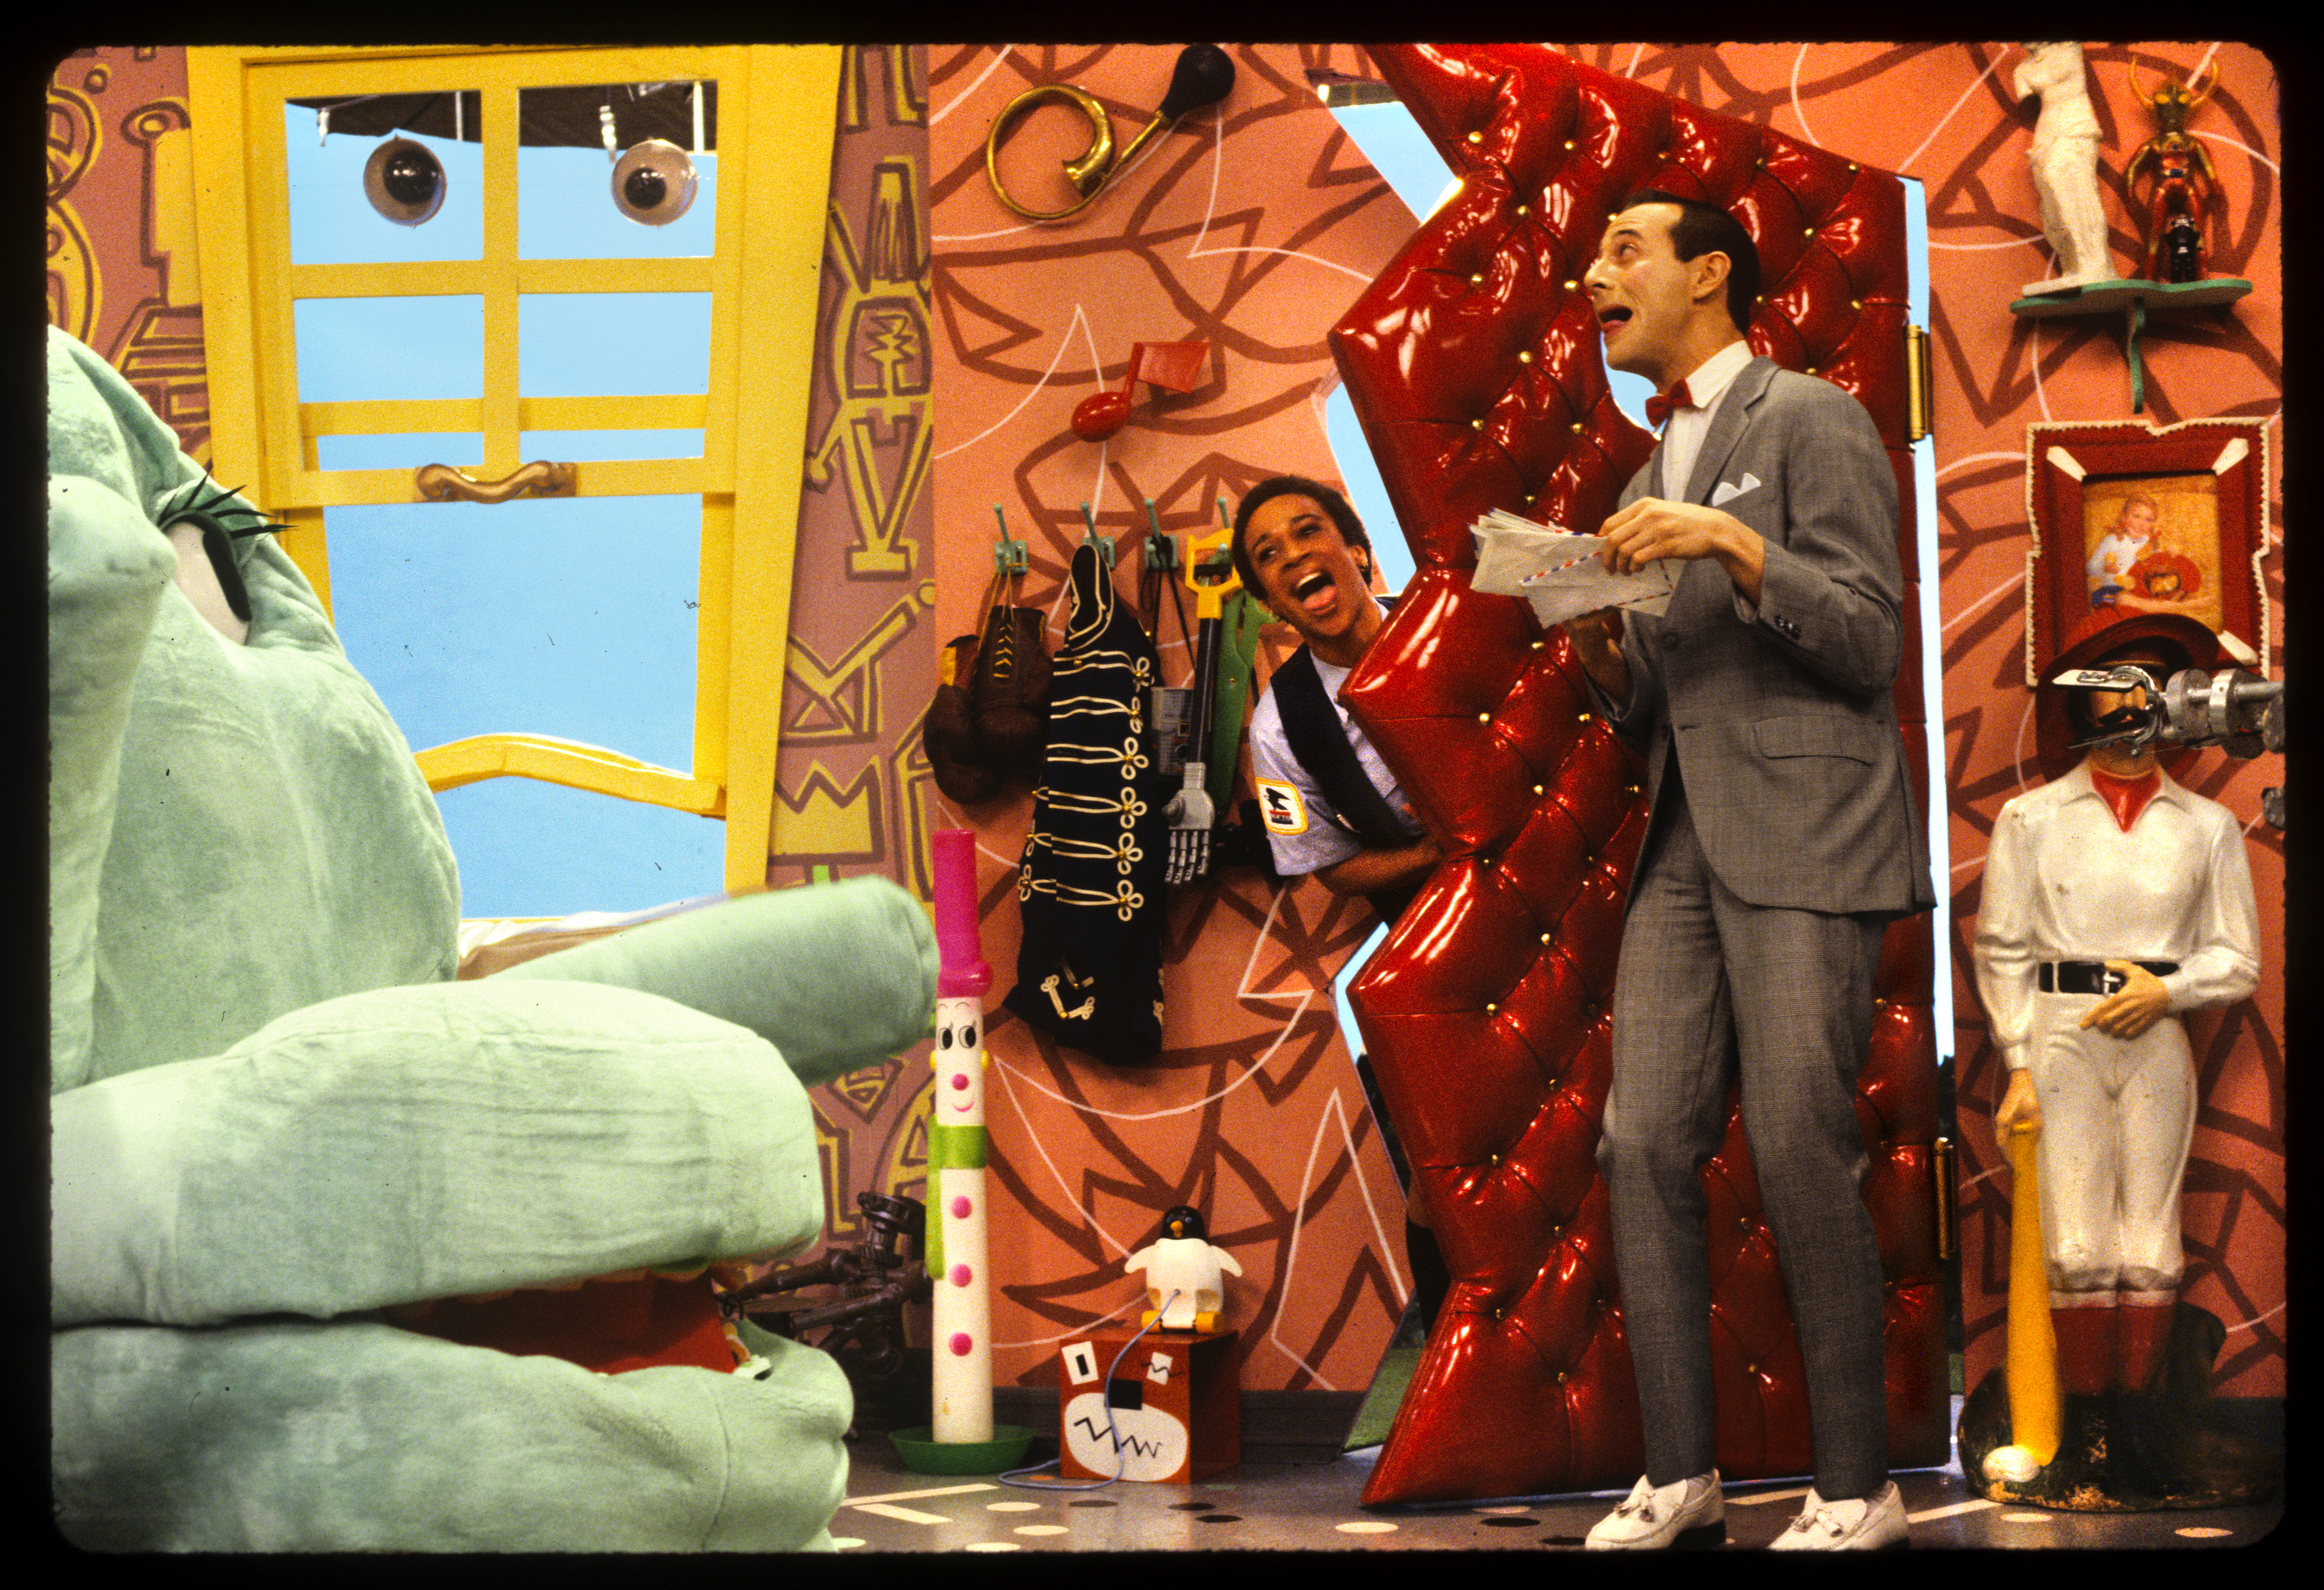 Still From ‘Pee Wee’s Playhouse’